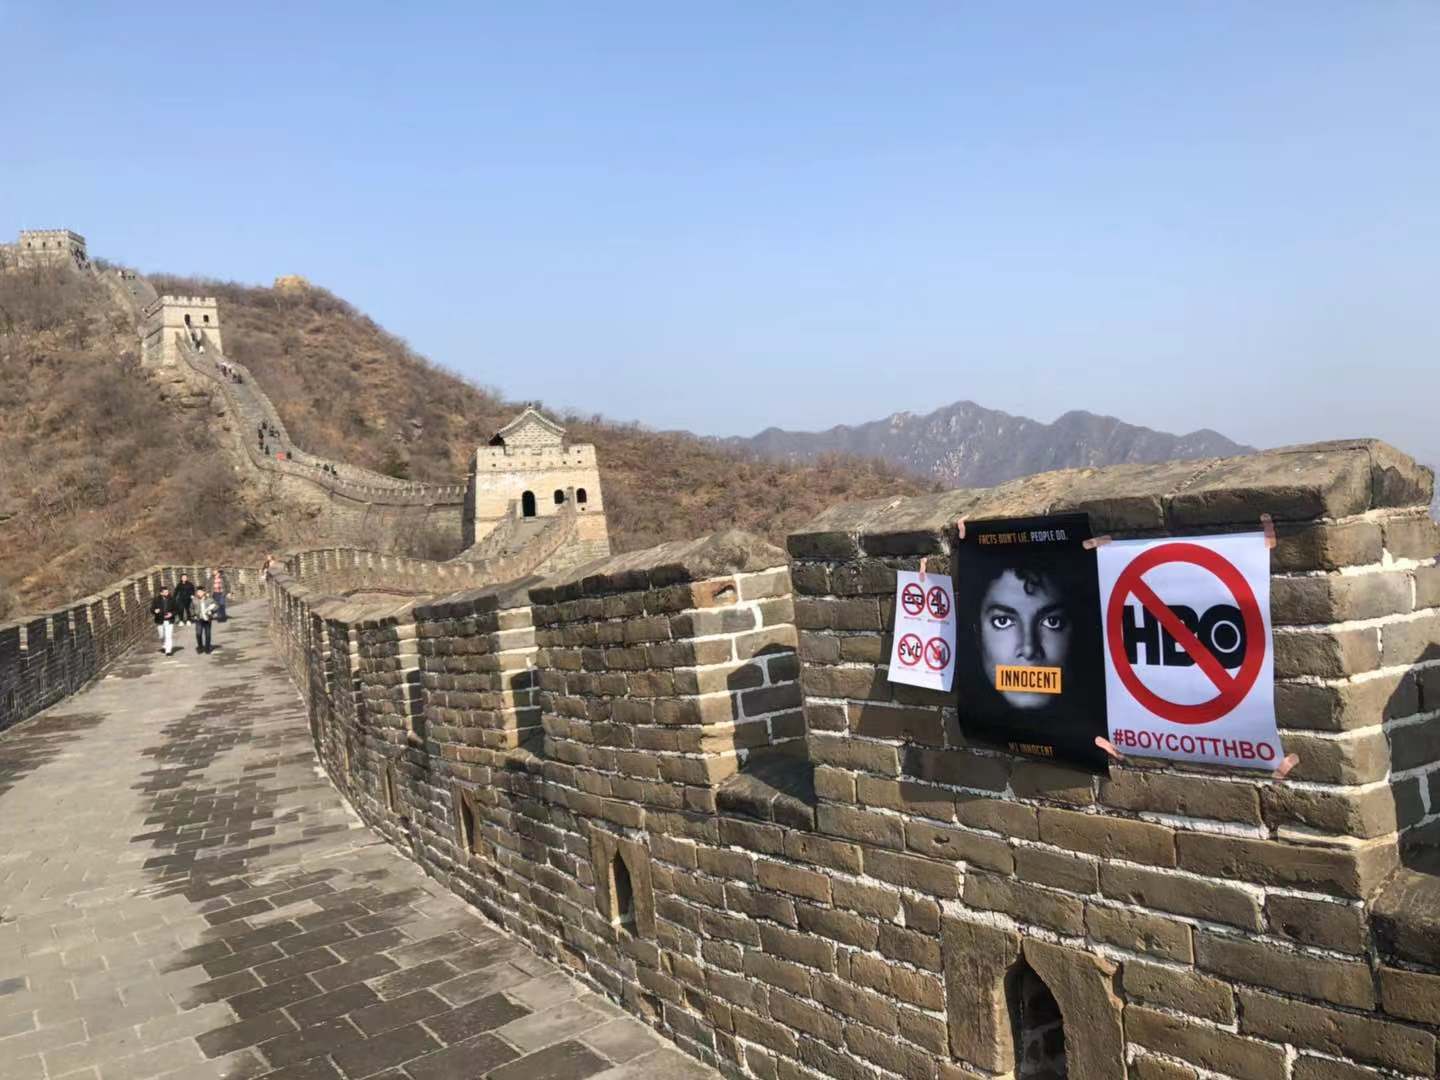 Michael Jackson protest signs on the Great Wall of China